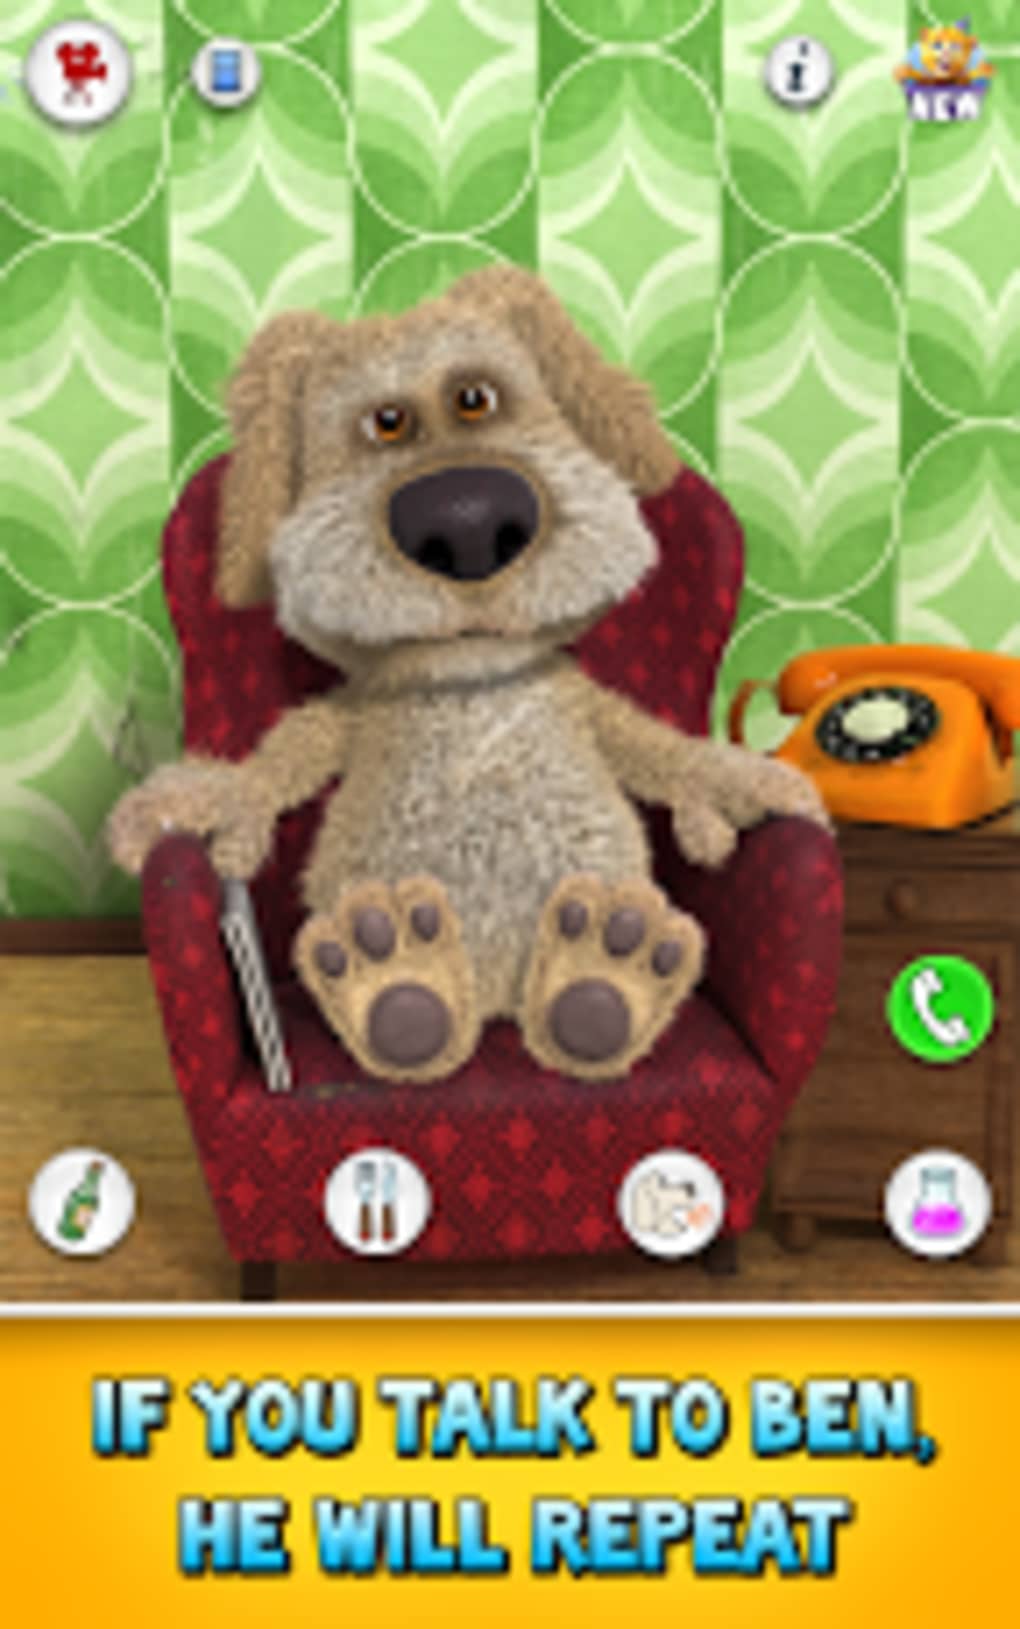 Free Talking Ben the Dog Free for Android Software Download